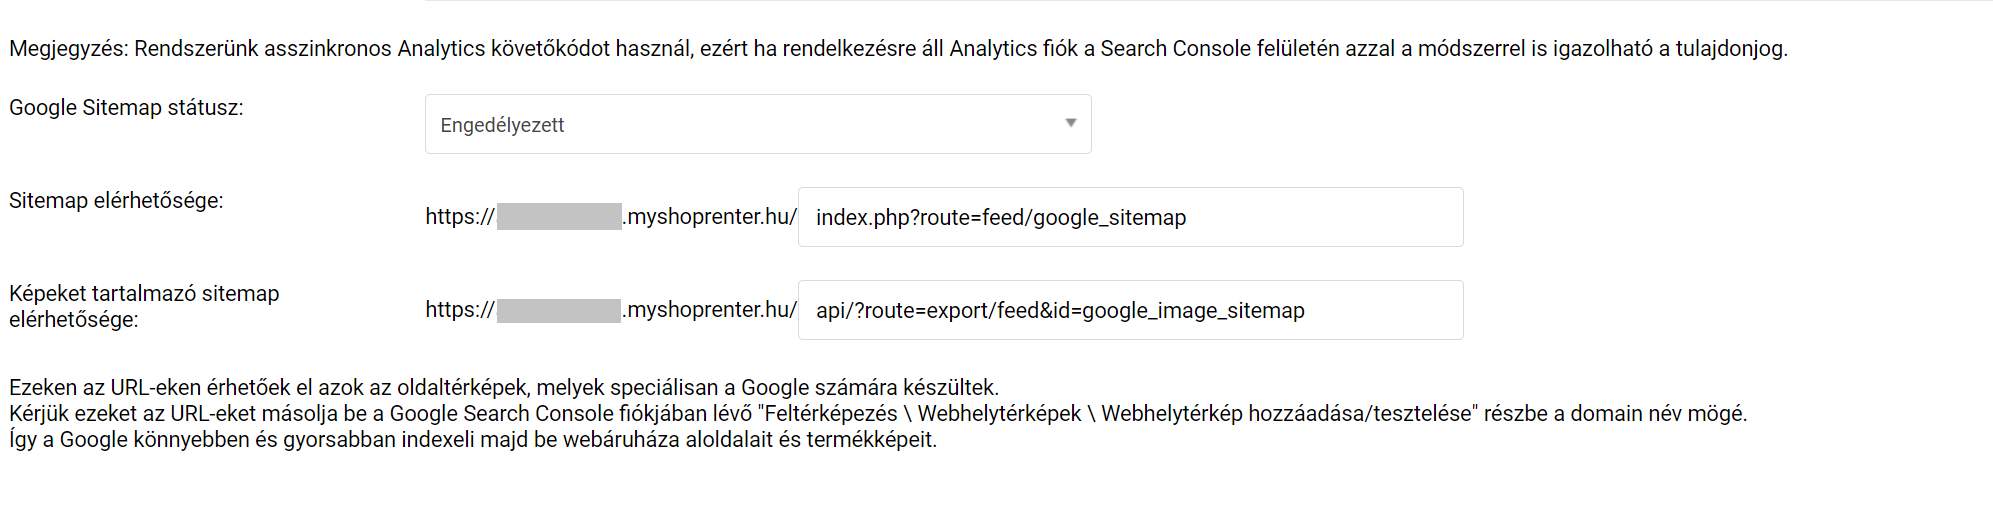 seo_sitemaps.png